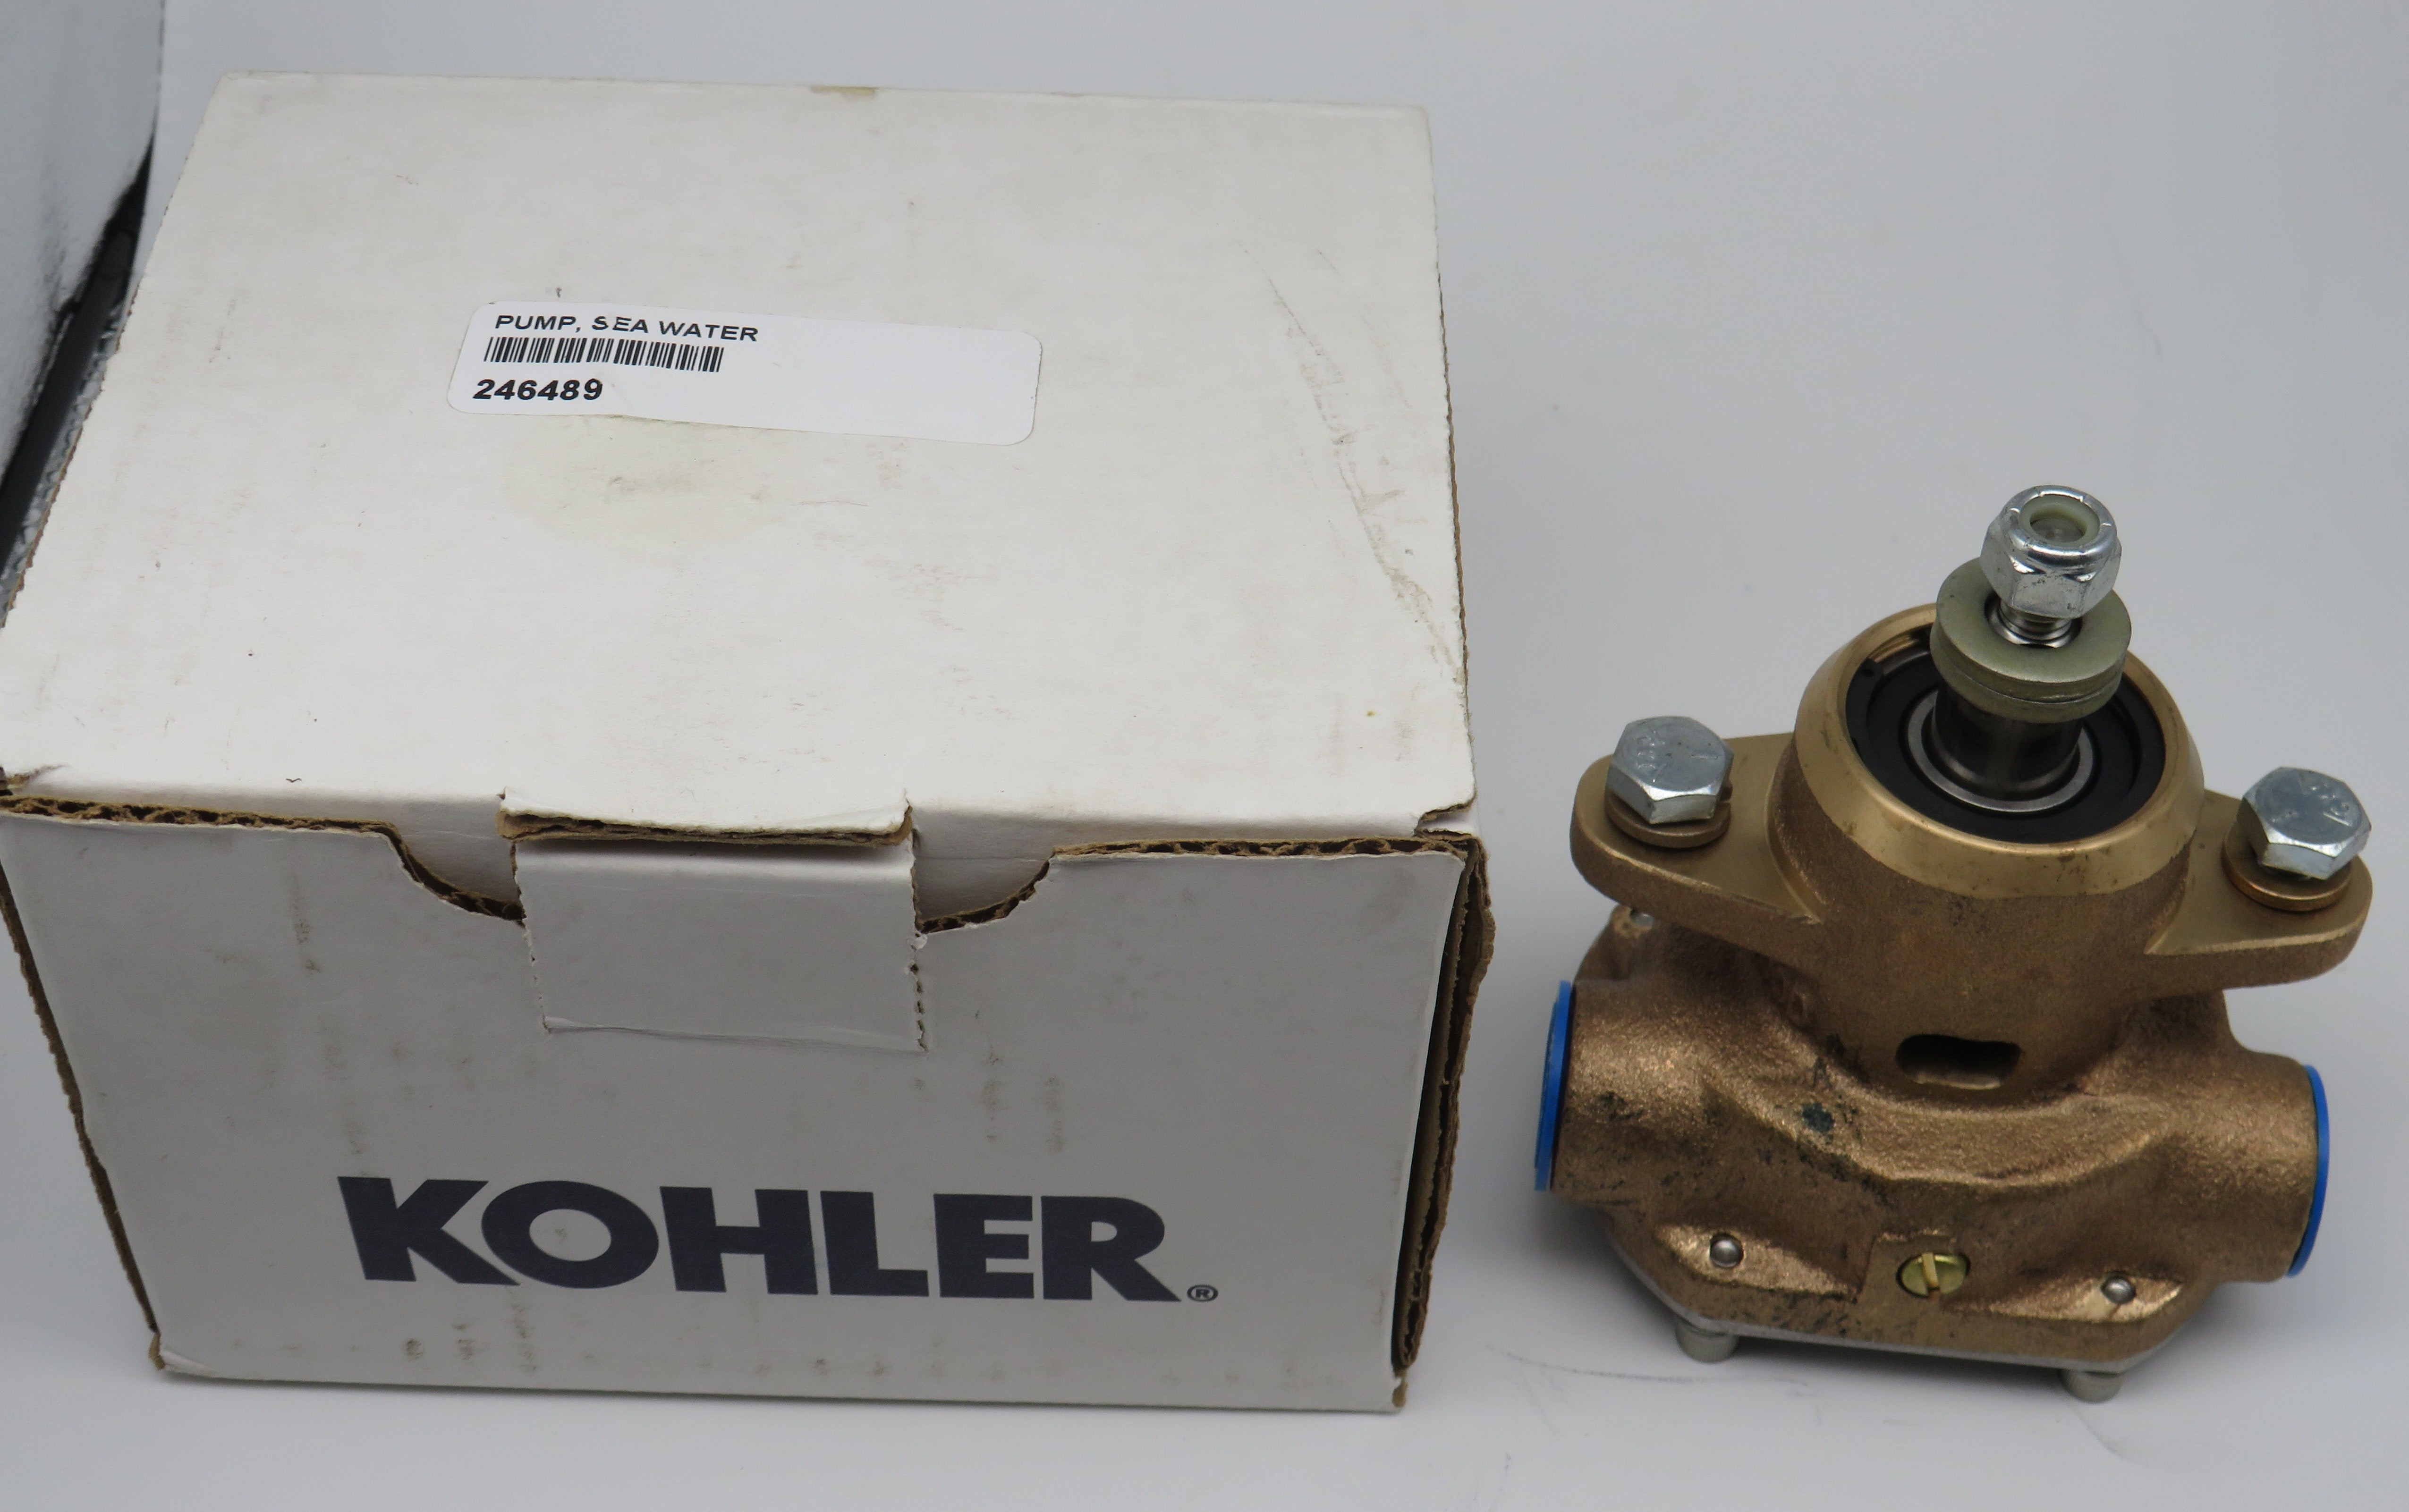 246489 Kohler Pump, Sea Water, Without Pulley For Kohler 6.5CZ23 (goes with 267437 seawater pump drive)